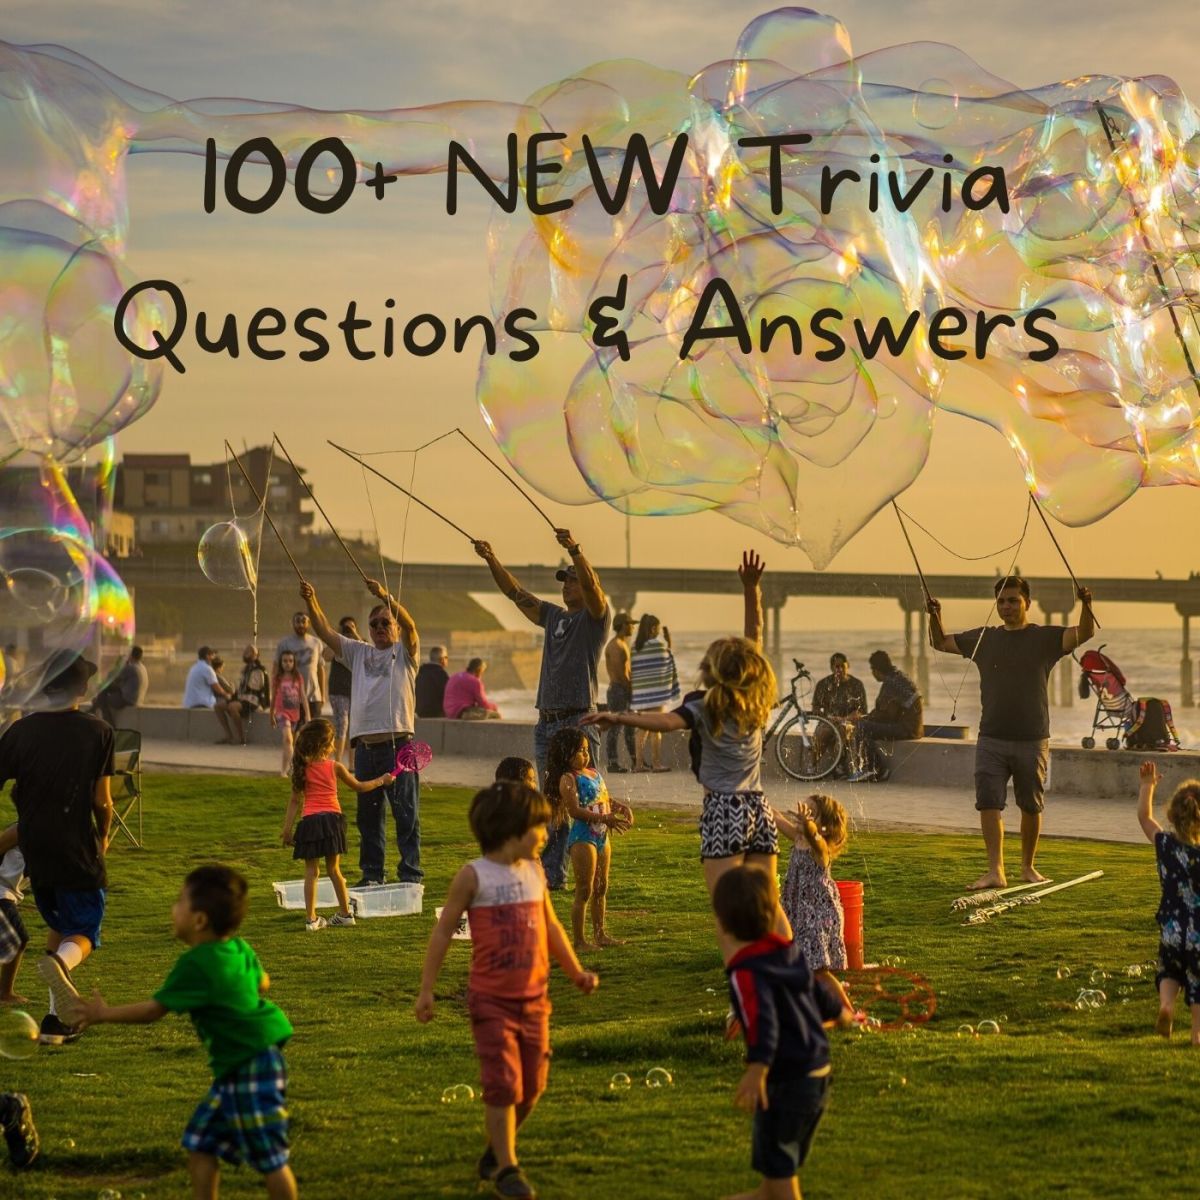 100+ New Trivia Questions and Answers for Your Trivia Game